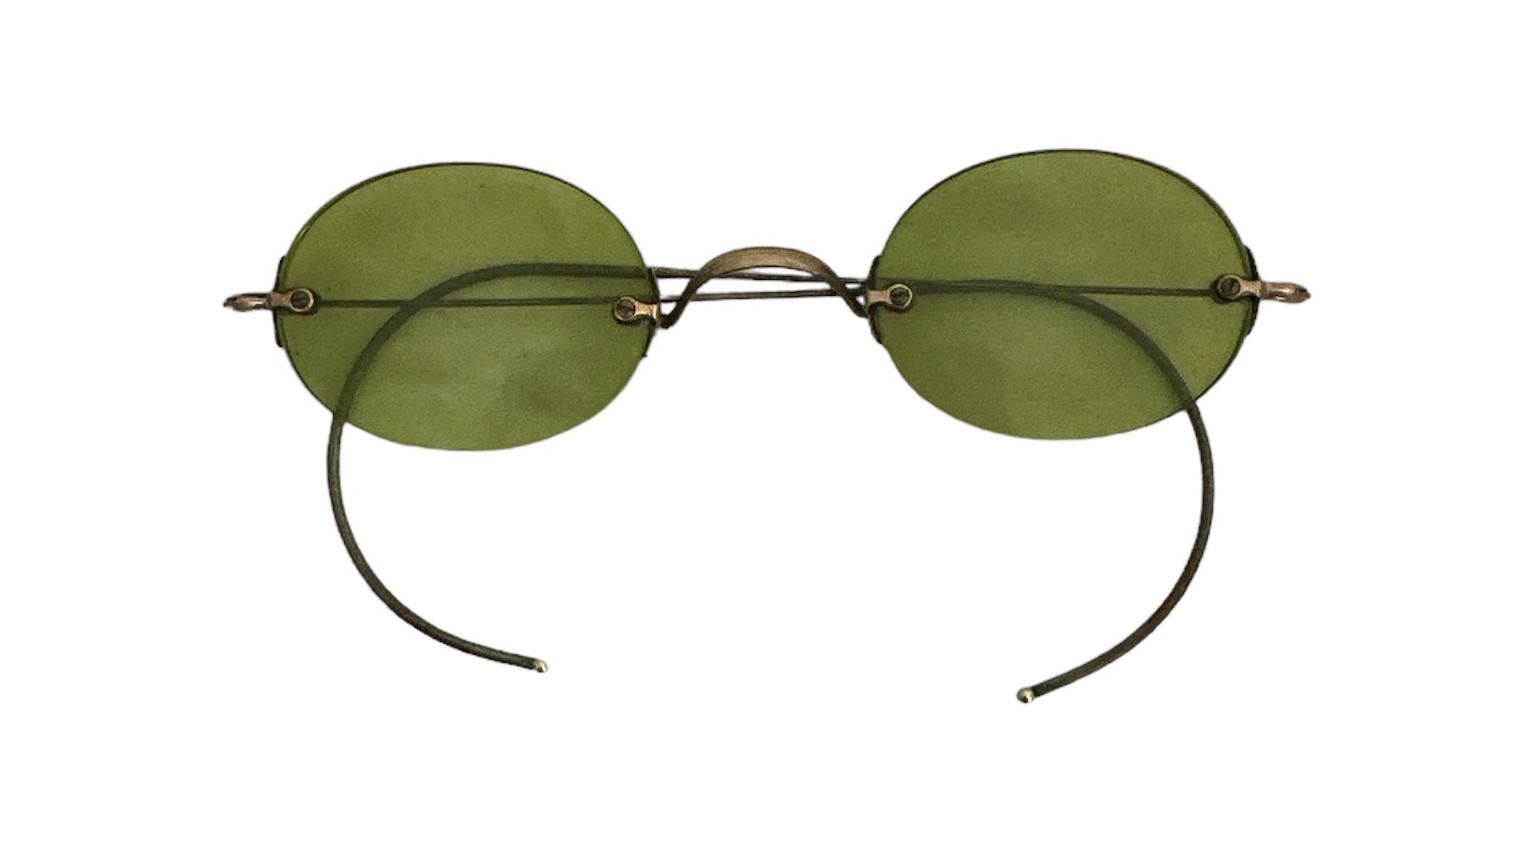 Lawrence & Mayo, antique pair of green tinted glasses / sunglasses in original Lawrence & Mayo case.